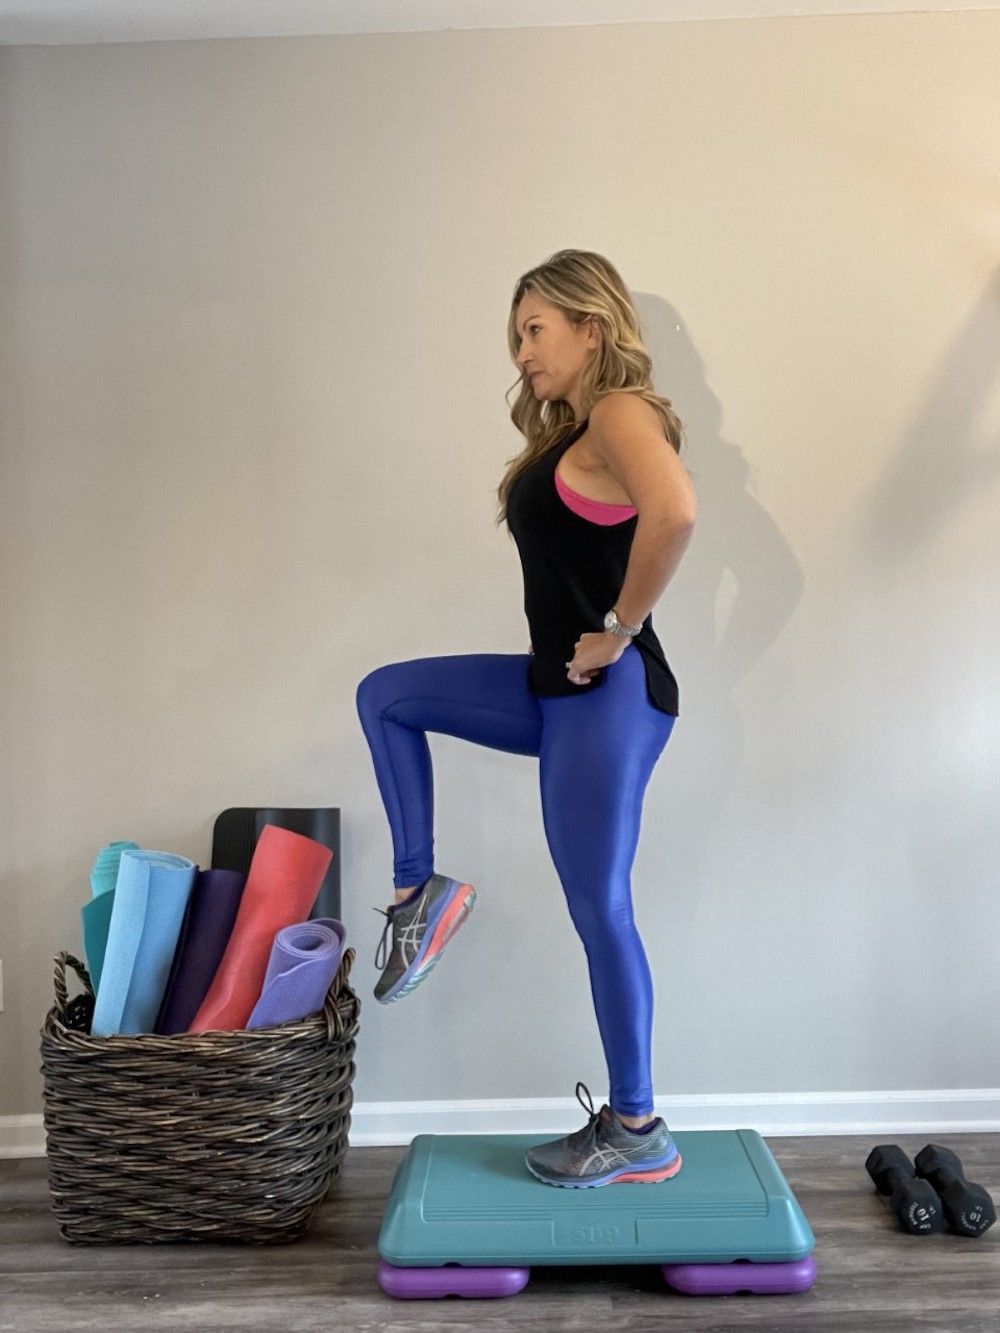 Simple Balance Exercises That You Can Do at Home - Santé Cares